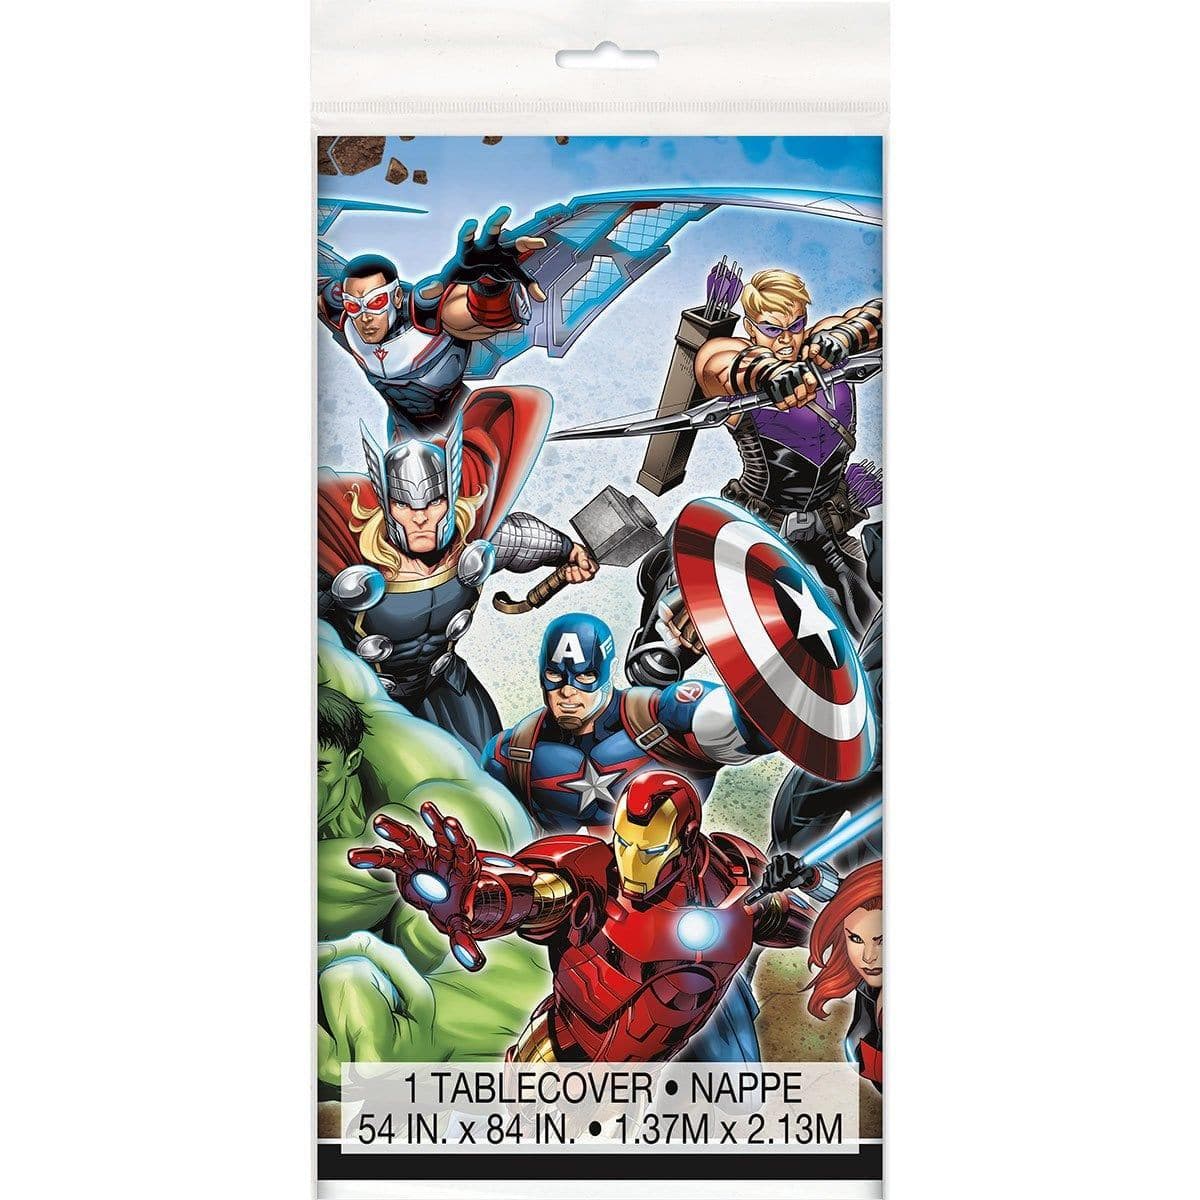 Buy Kids Birthday Avengers Assemble tablecover sold at Party Expert